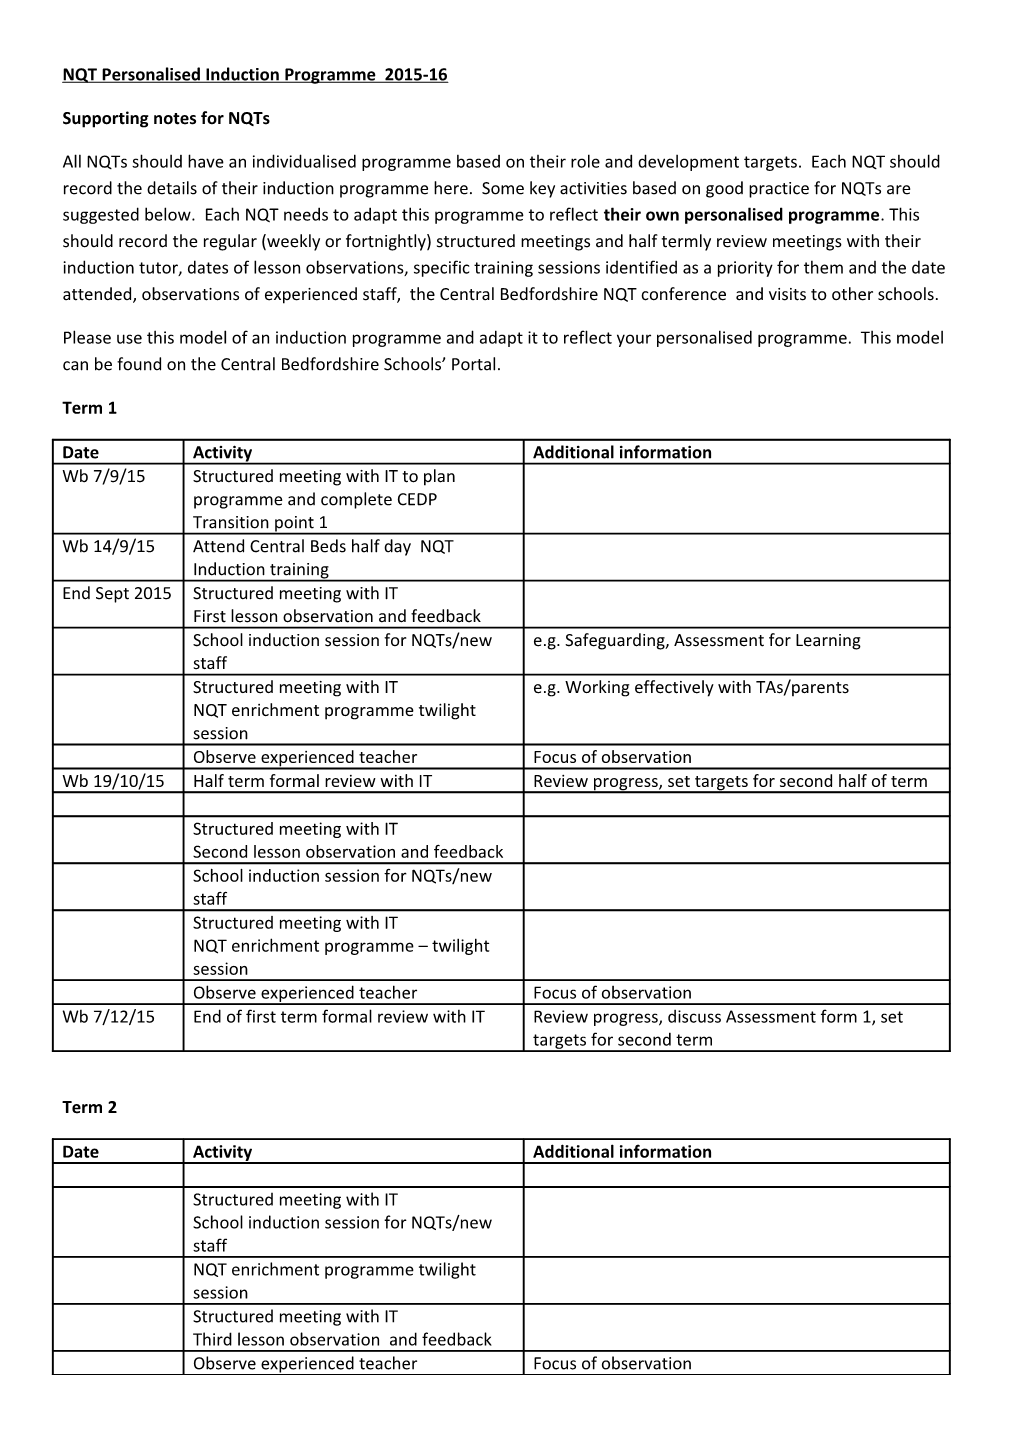 NQT Personalised Induction Programme 2015-16